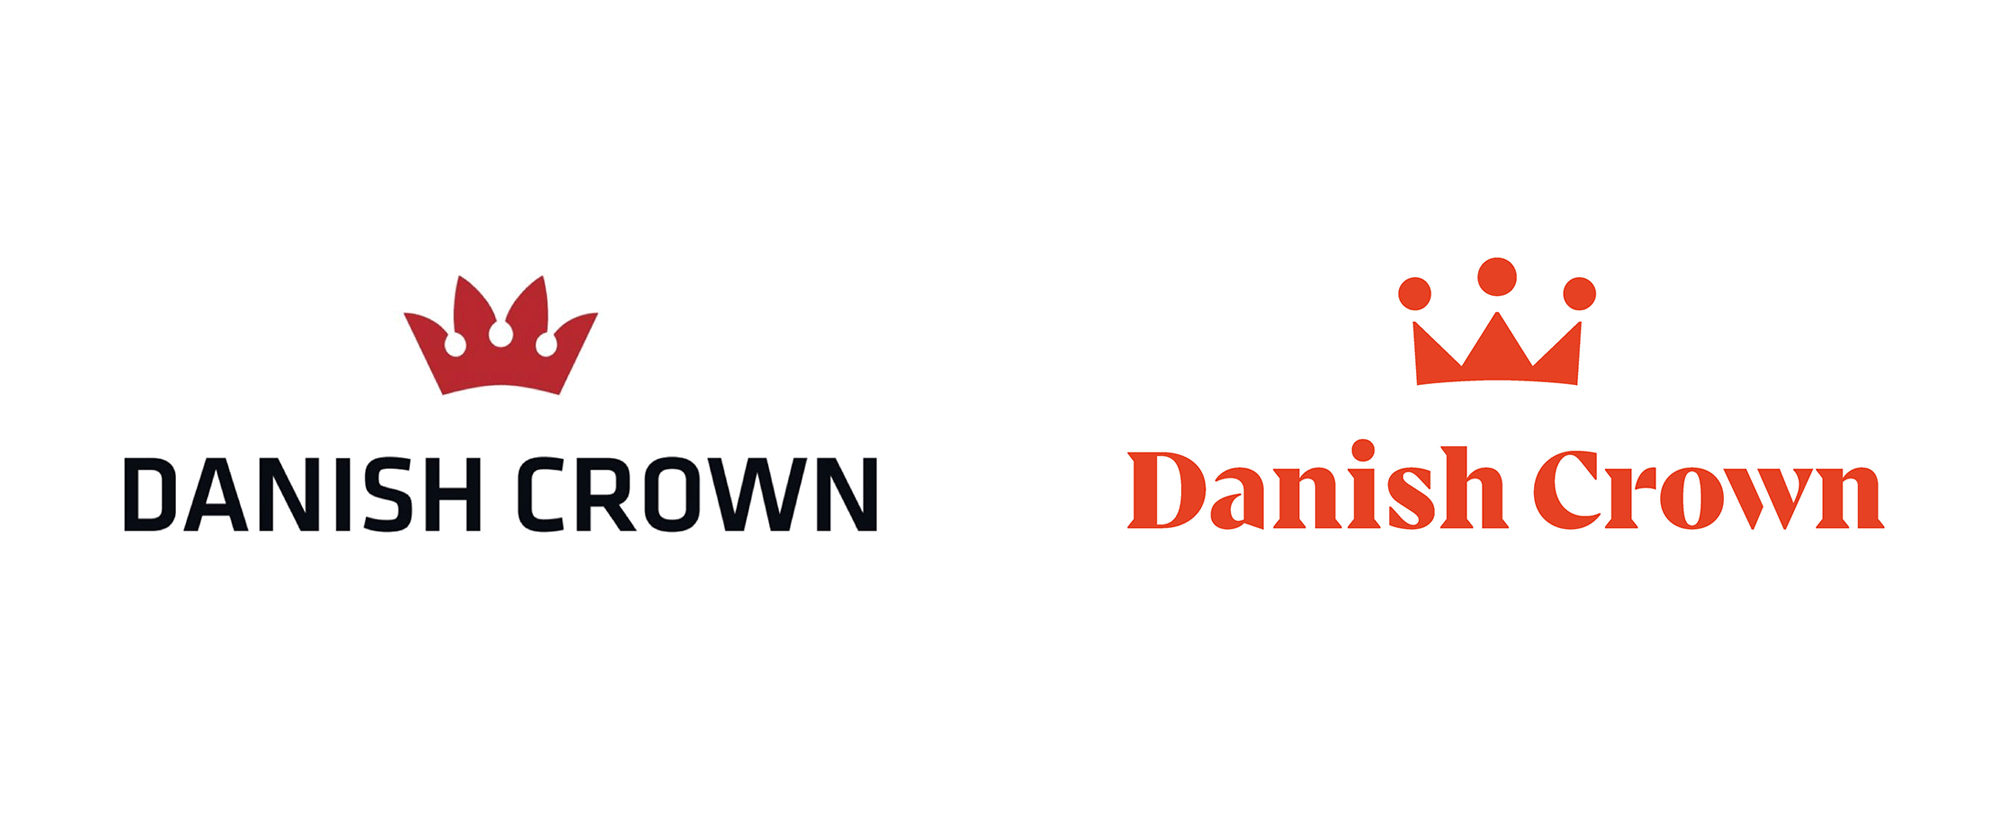 New Logo and Identity for Danish Crown by Kontrapunkt